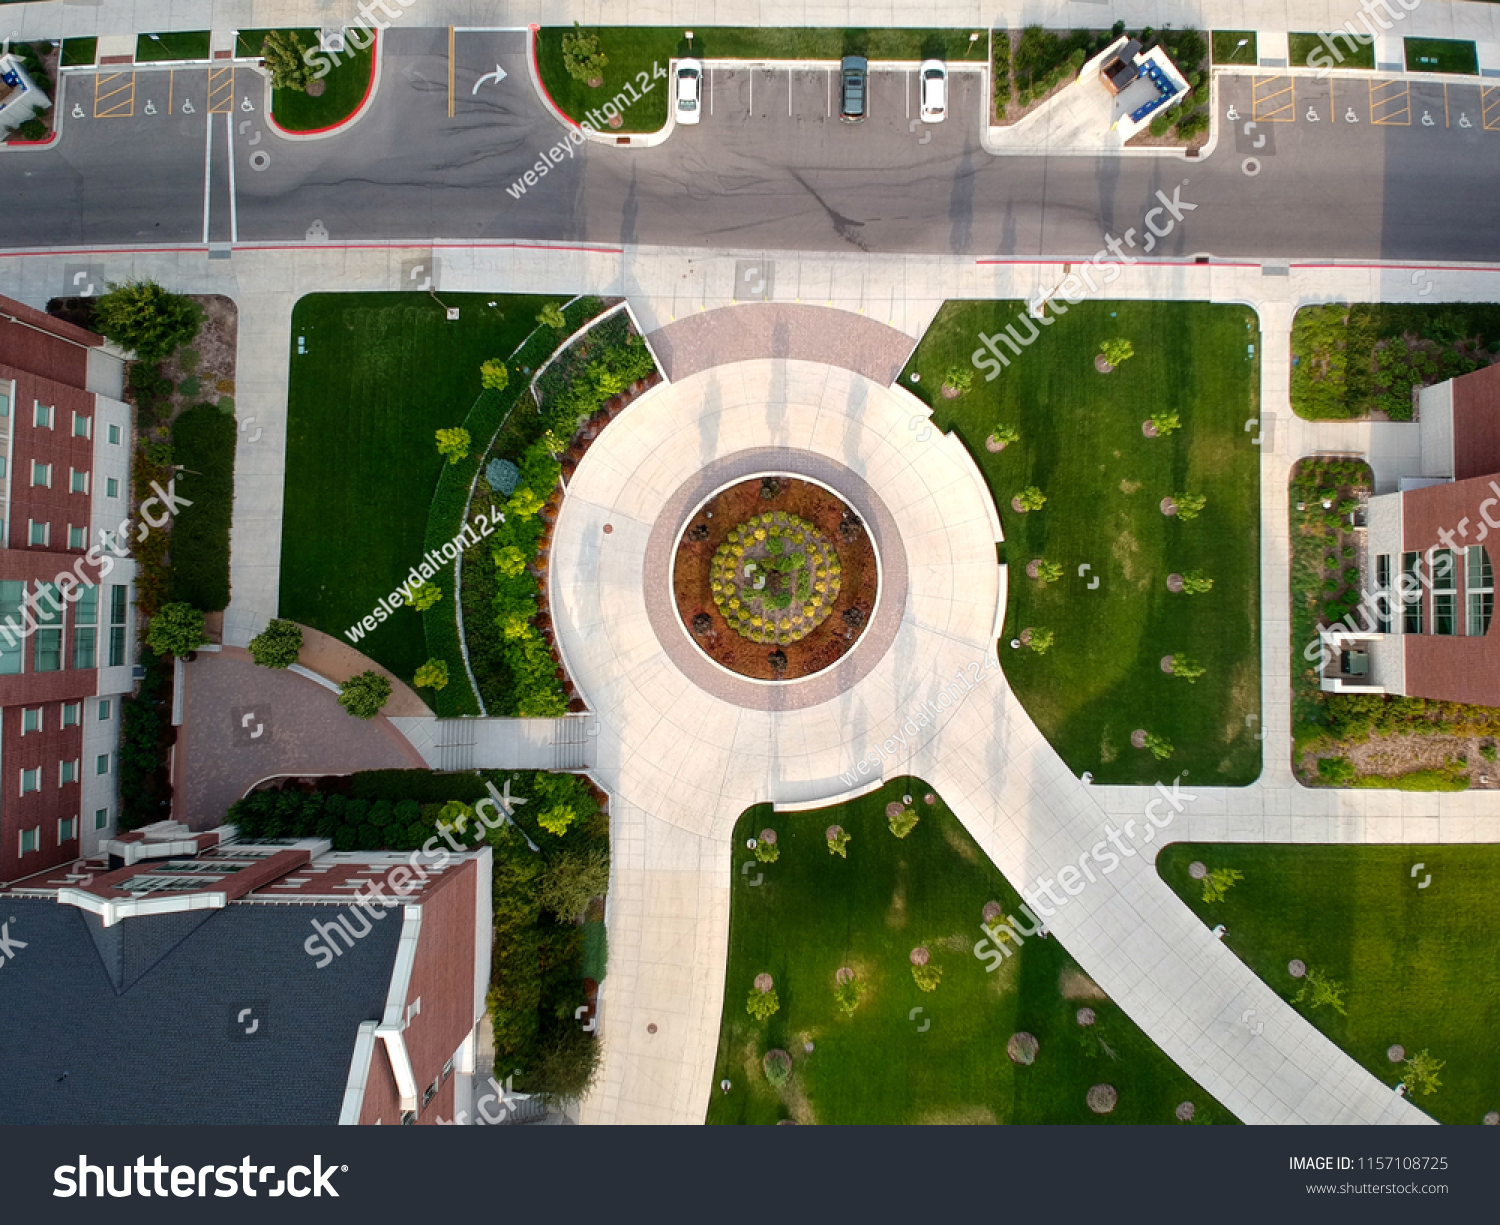 A roundabout with vegetation and structures. #1157108725